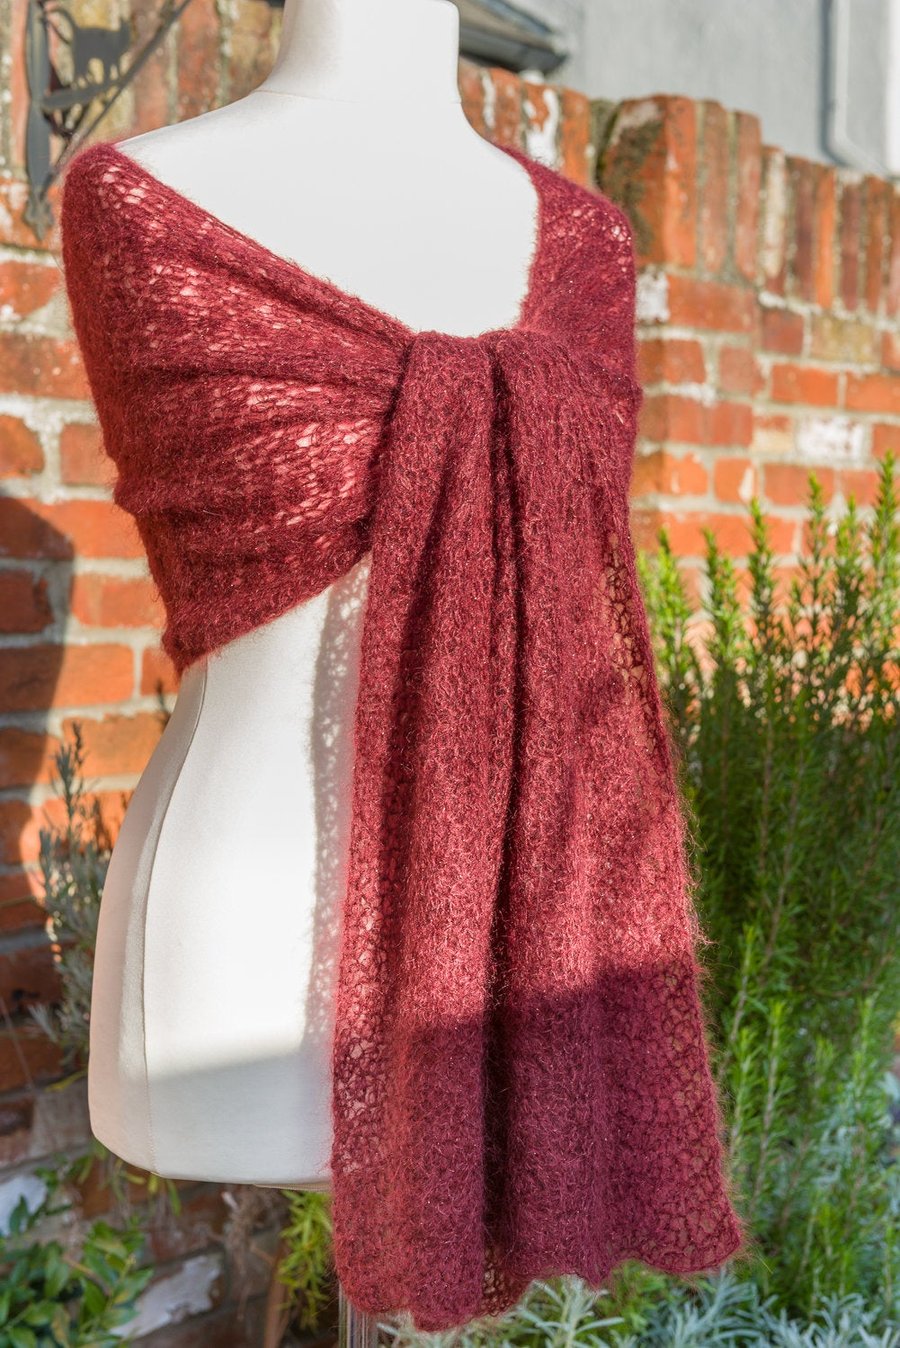 Party shawl in red coloured crochet lace - perfect party season cover up